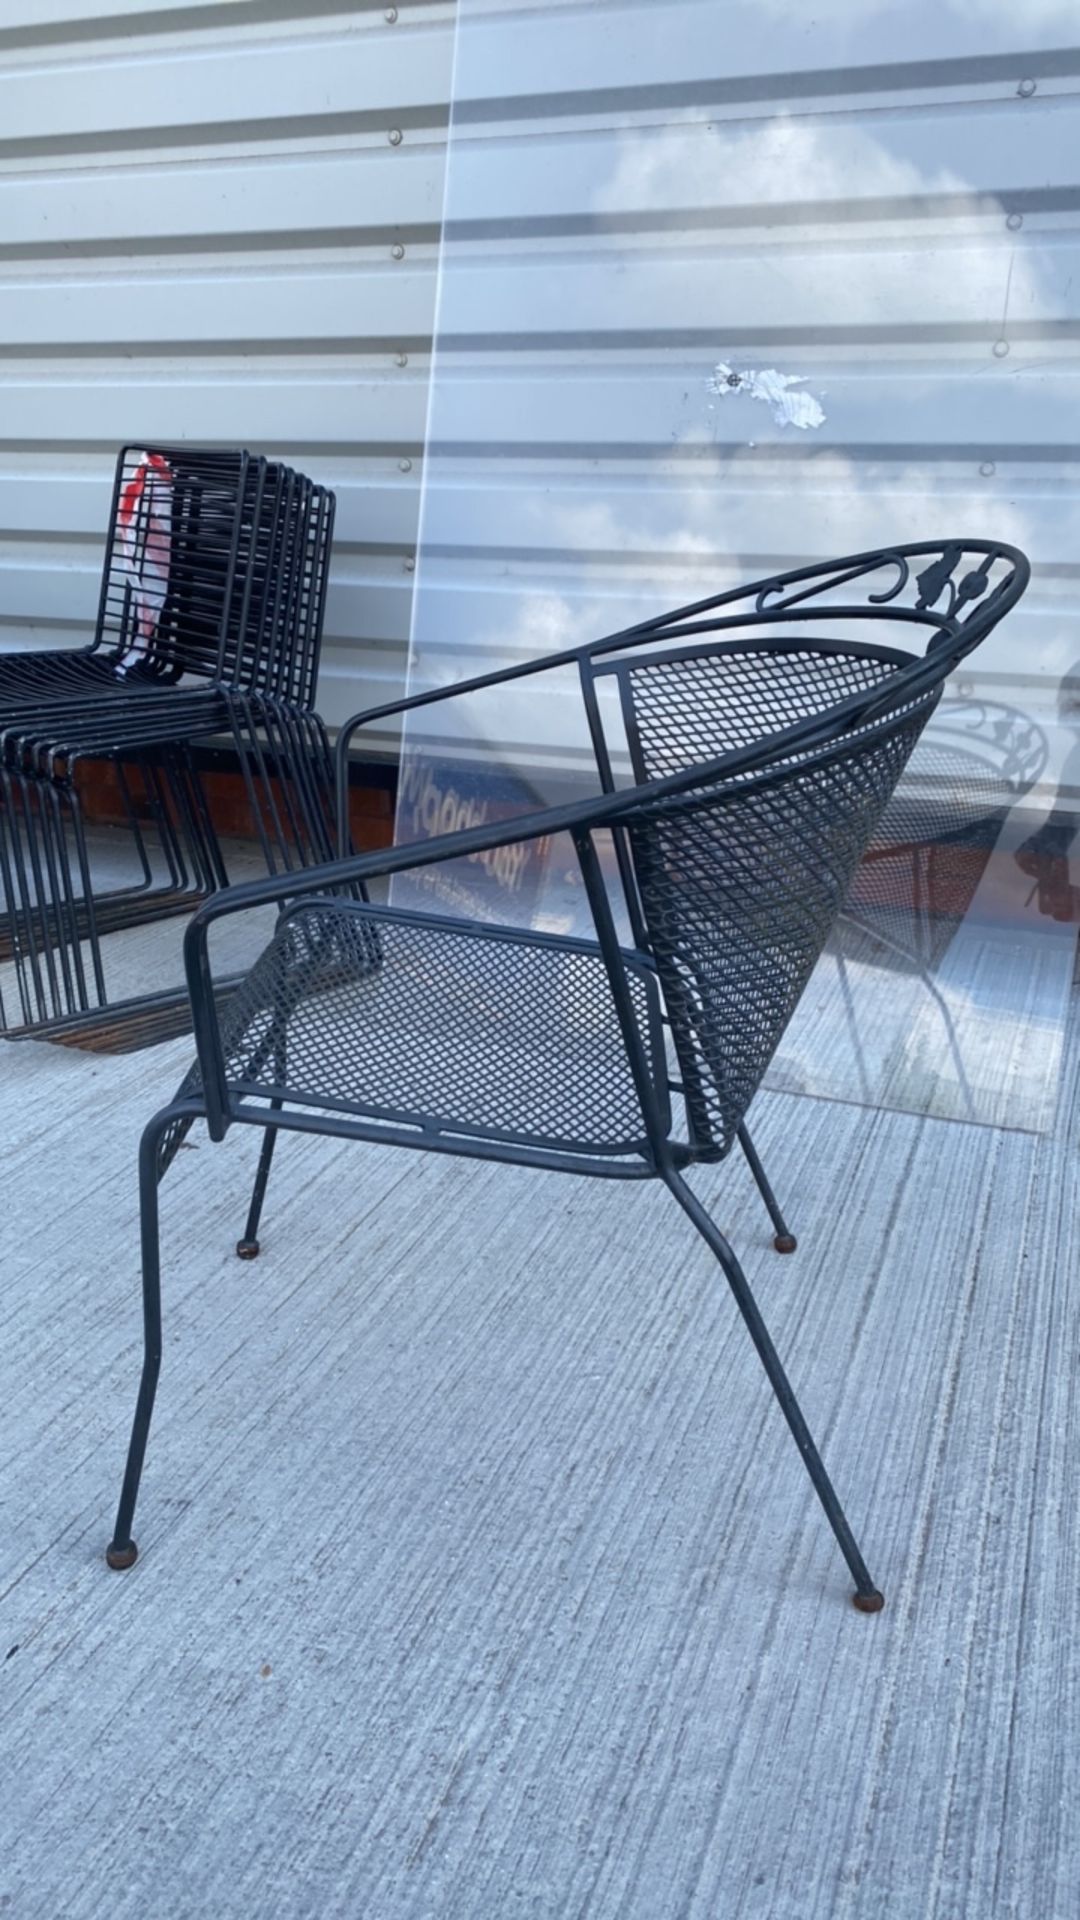 Outdoor Seating X4 - Image 4 of 4